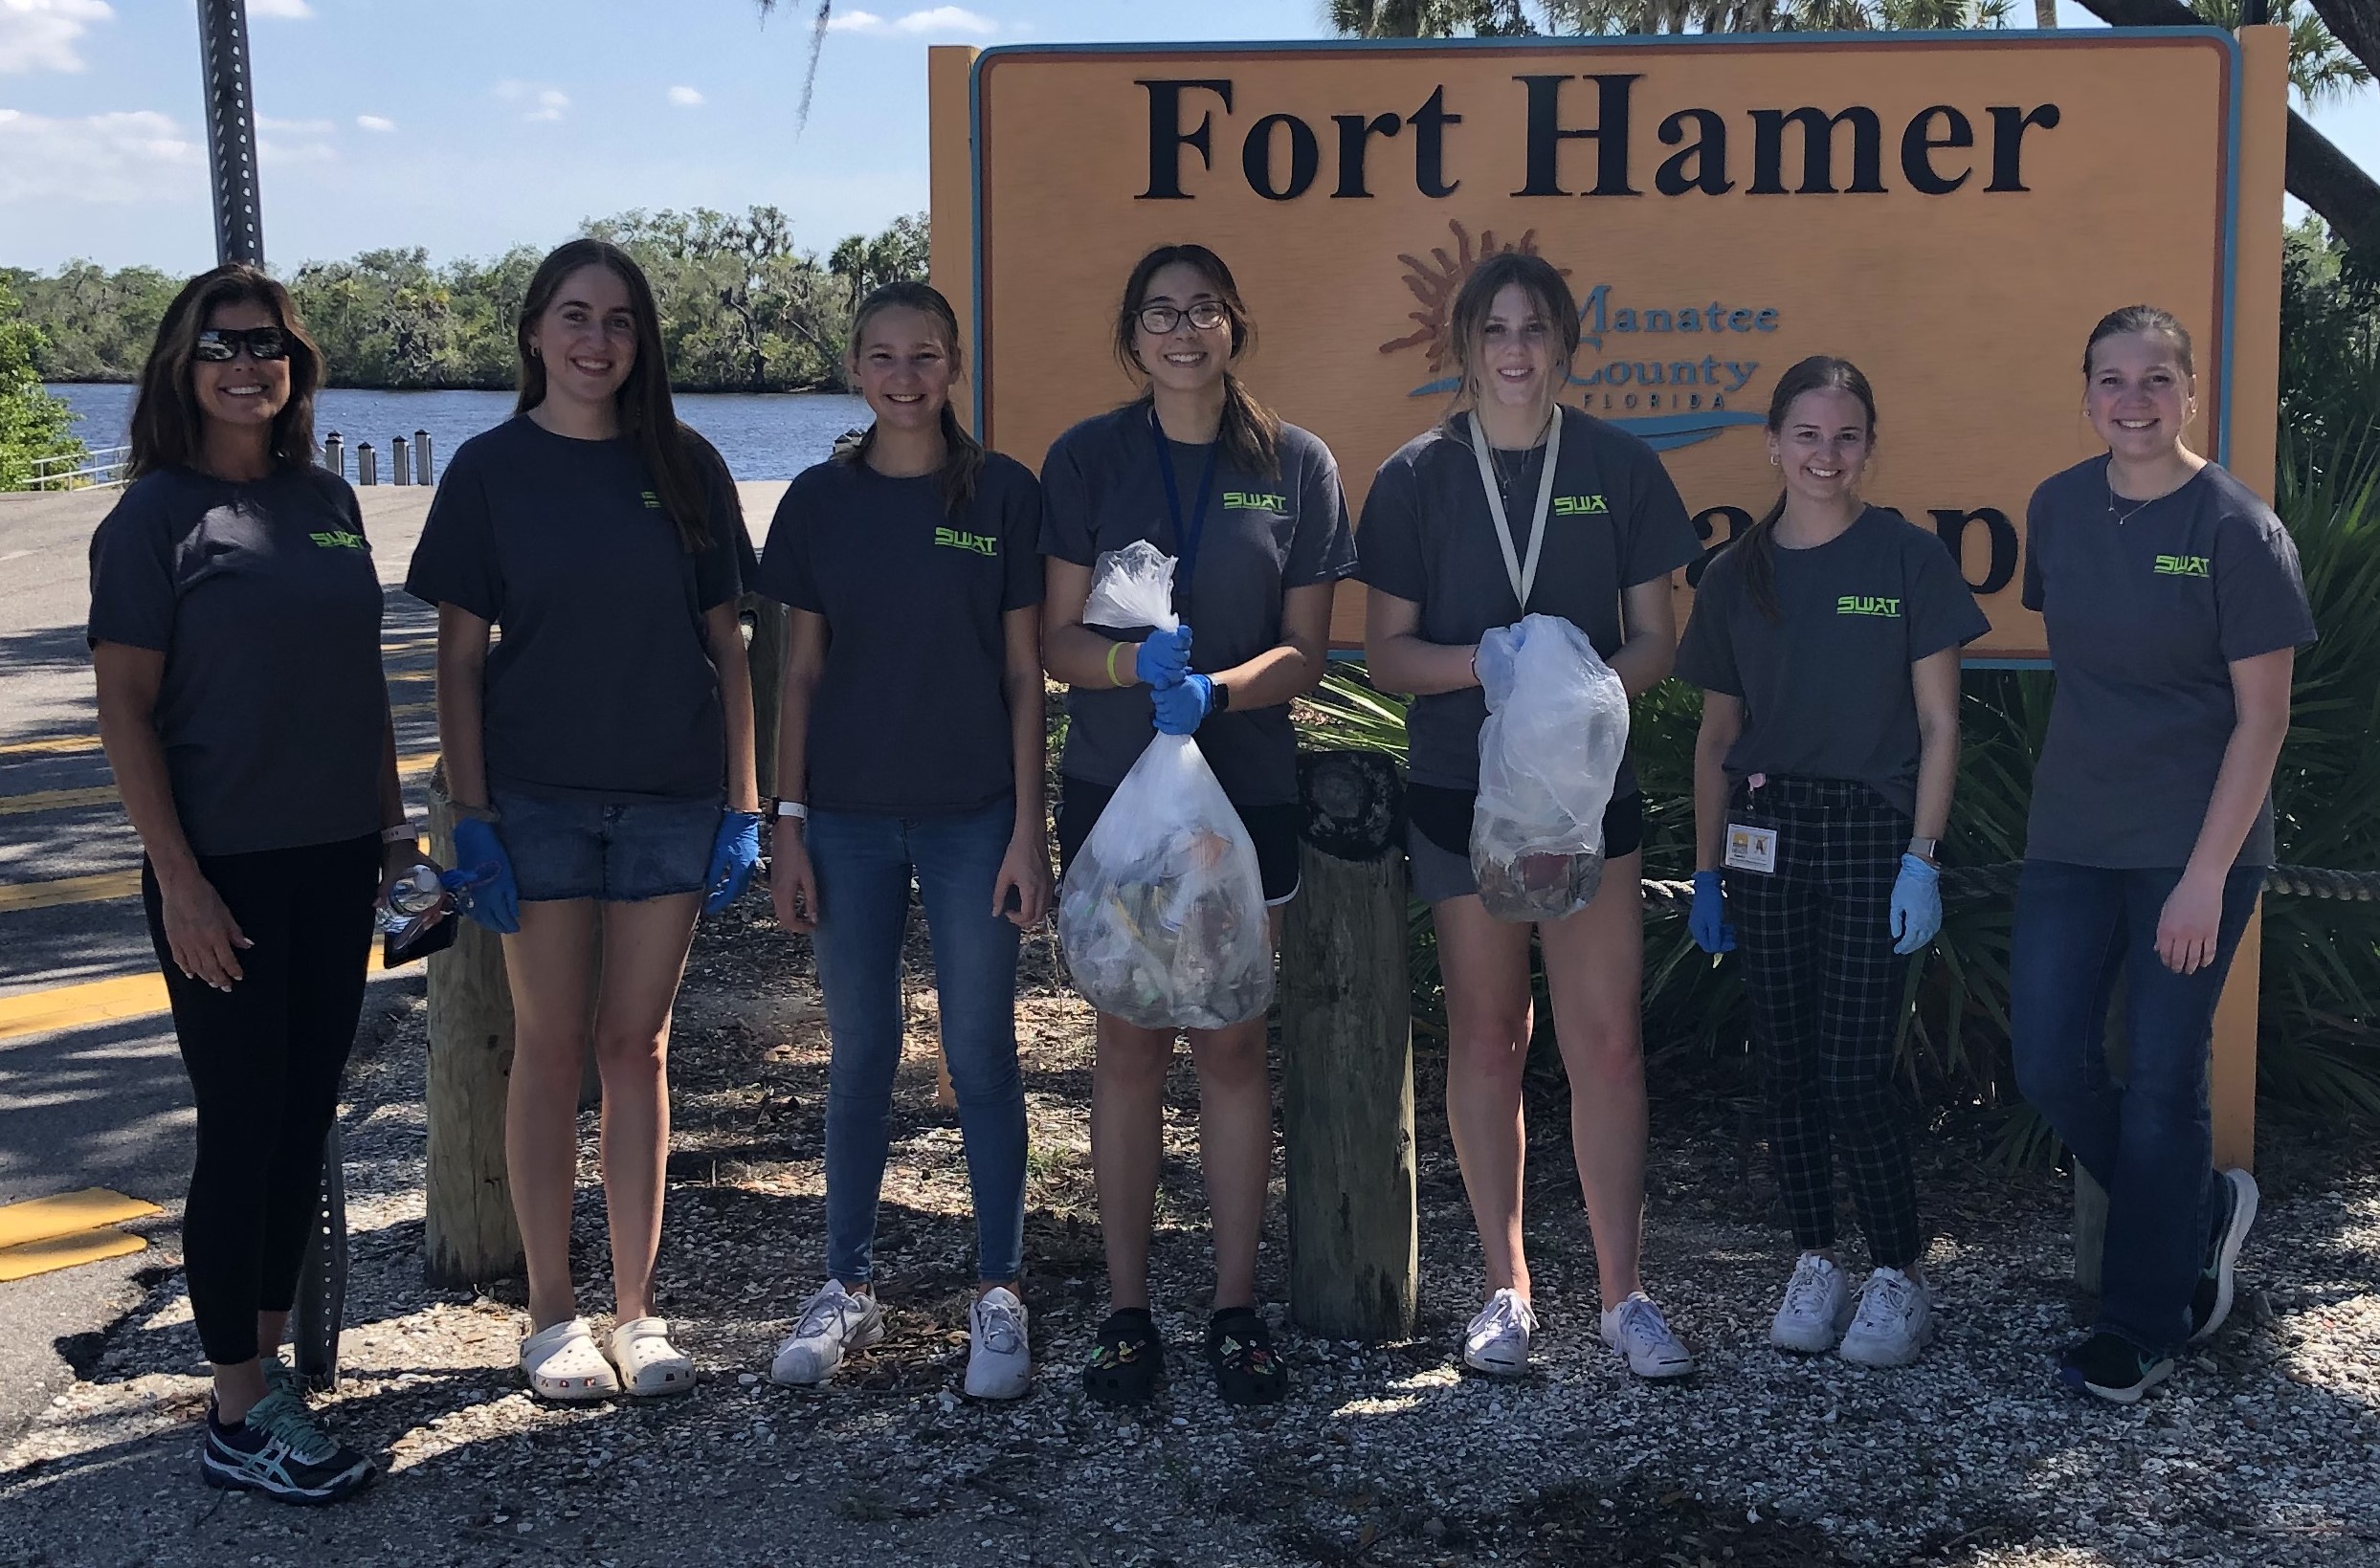 Manatee SWAT members display the butts, filters, boxes, lighters, and other tobacco-related litter collected during a clean-up event at Fort Hammer in Parrish.